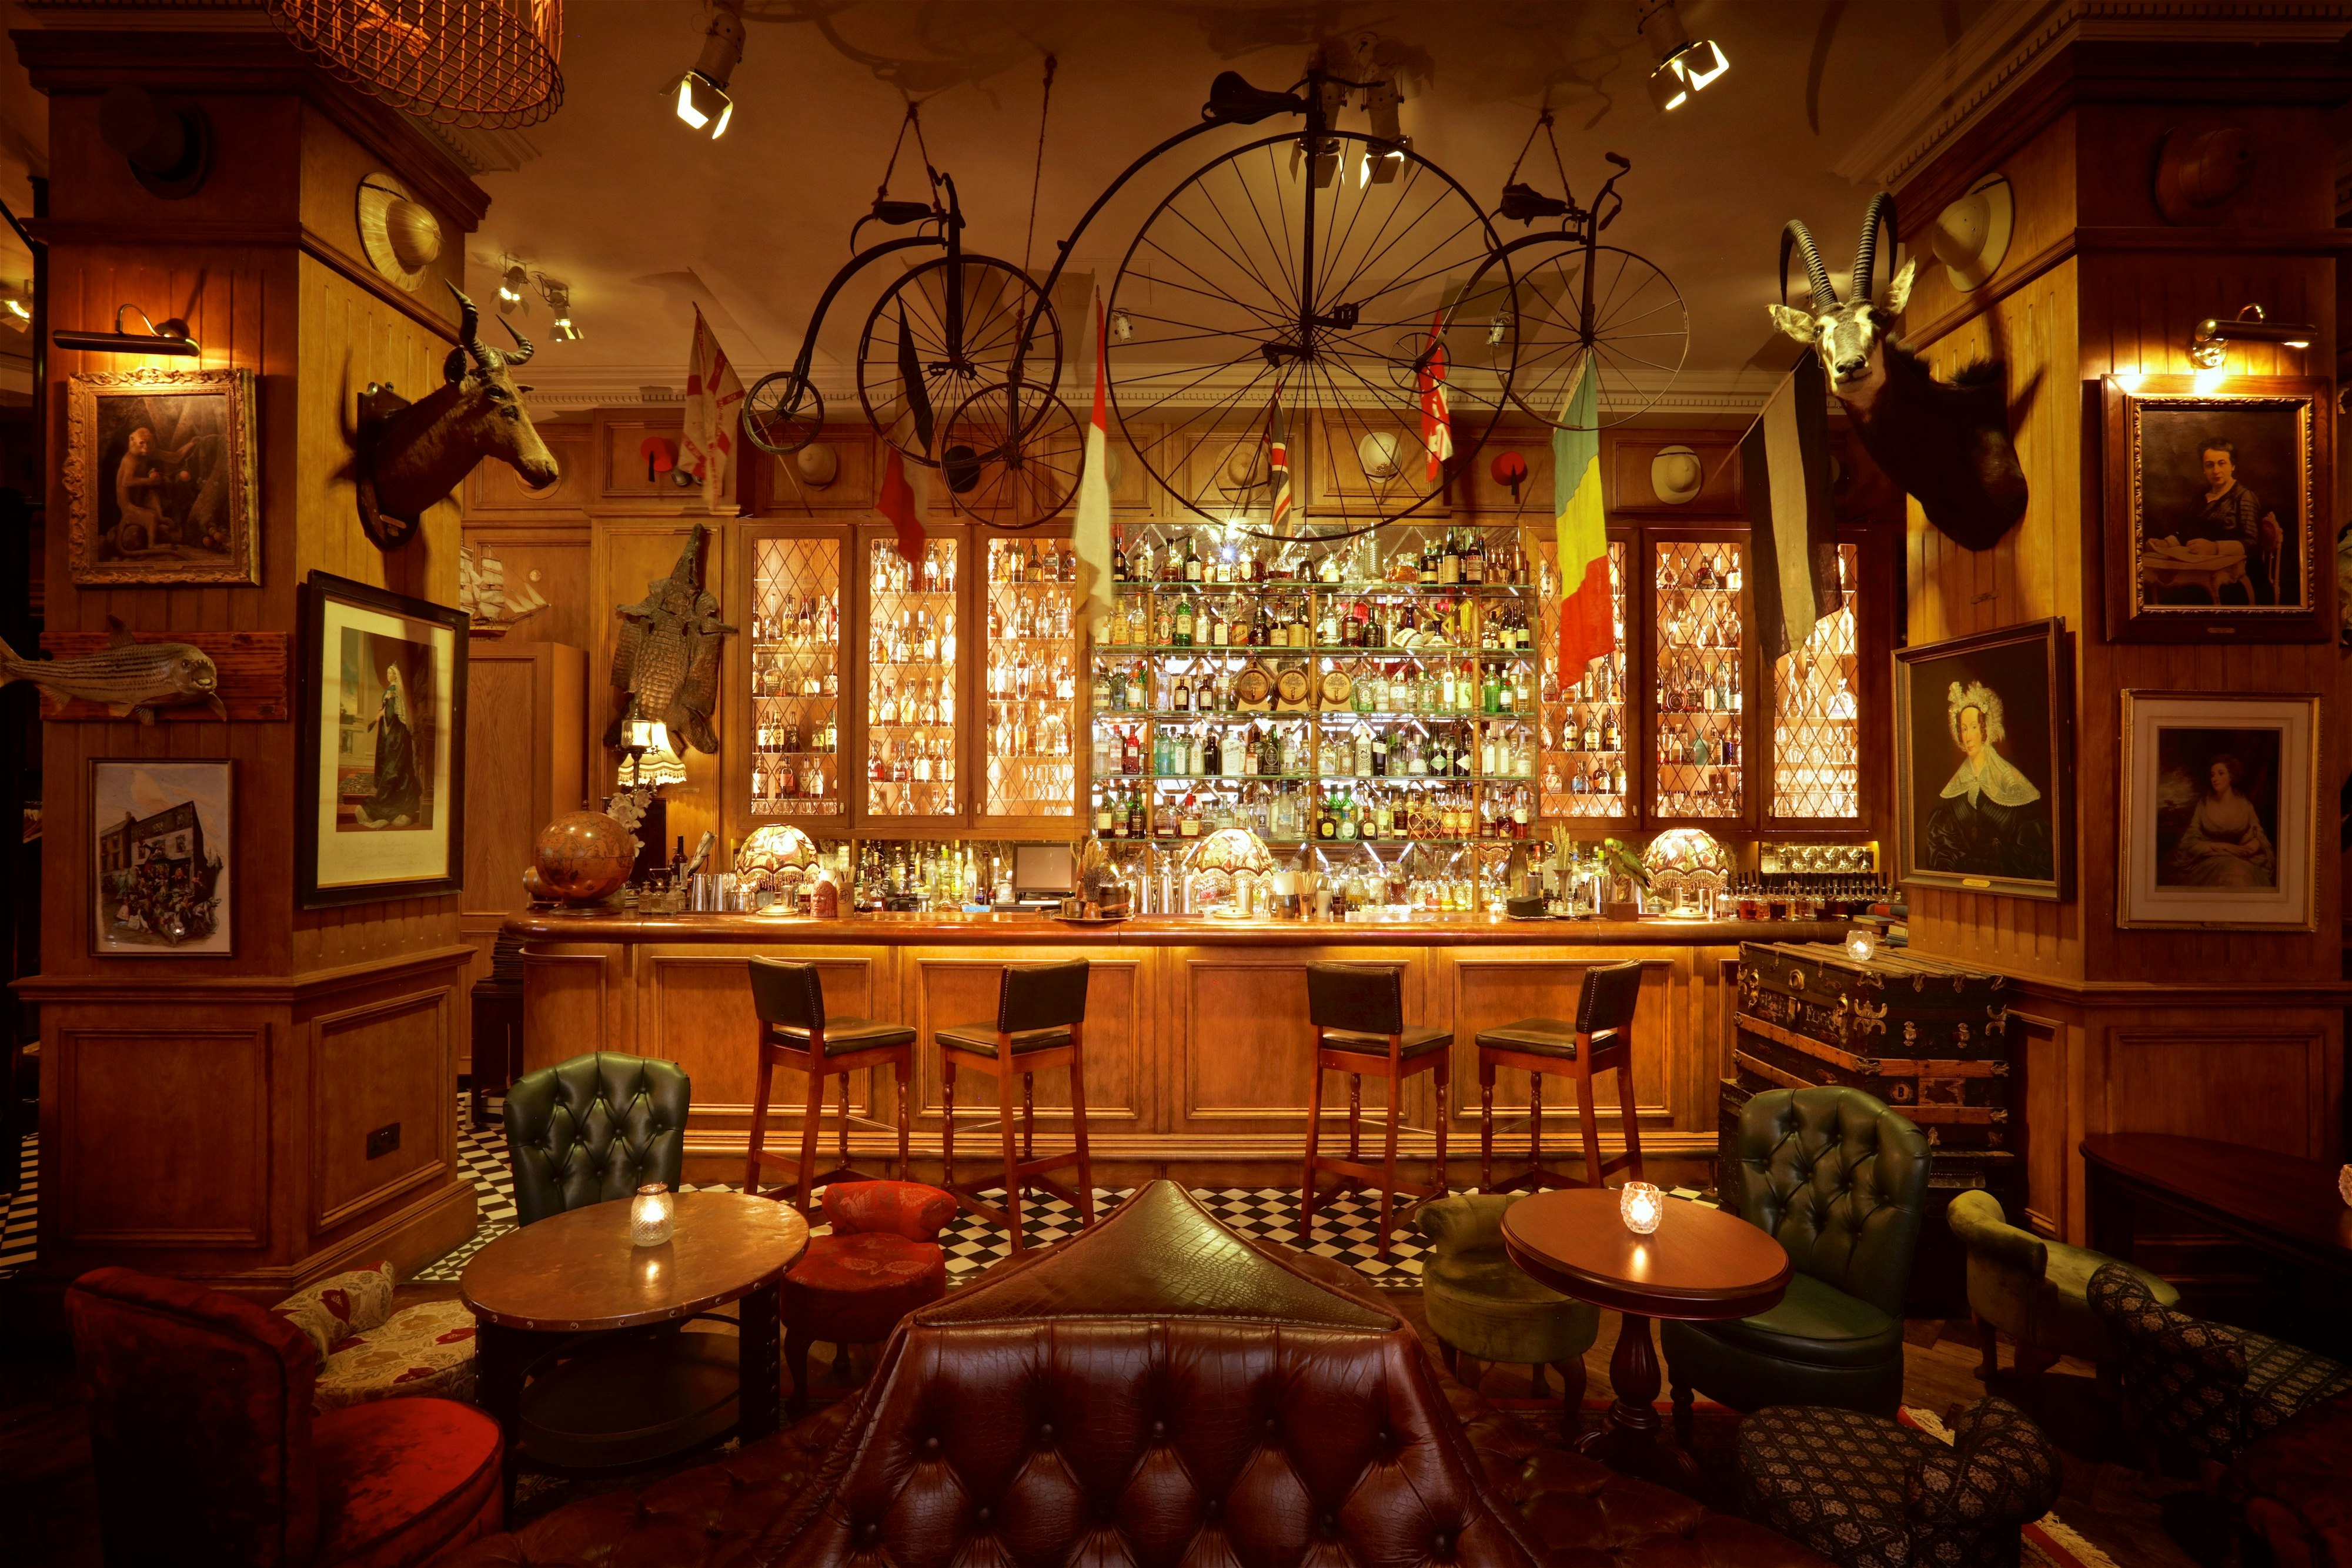 Minimum Spend Venues in Central London - Mr Fogg's Residence